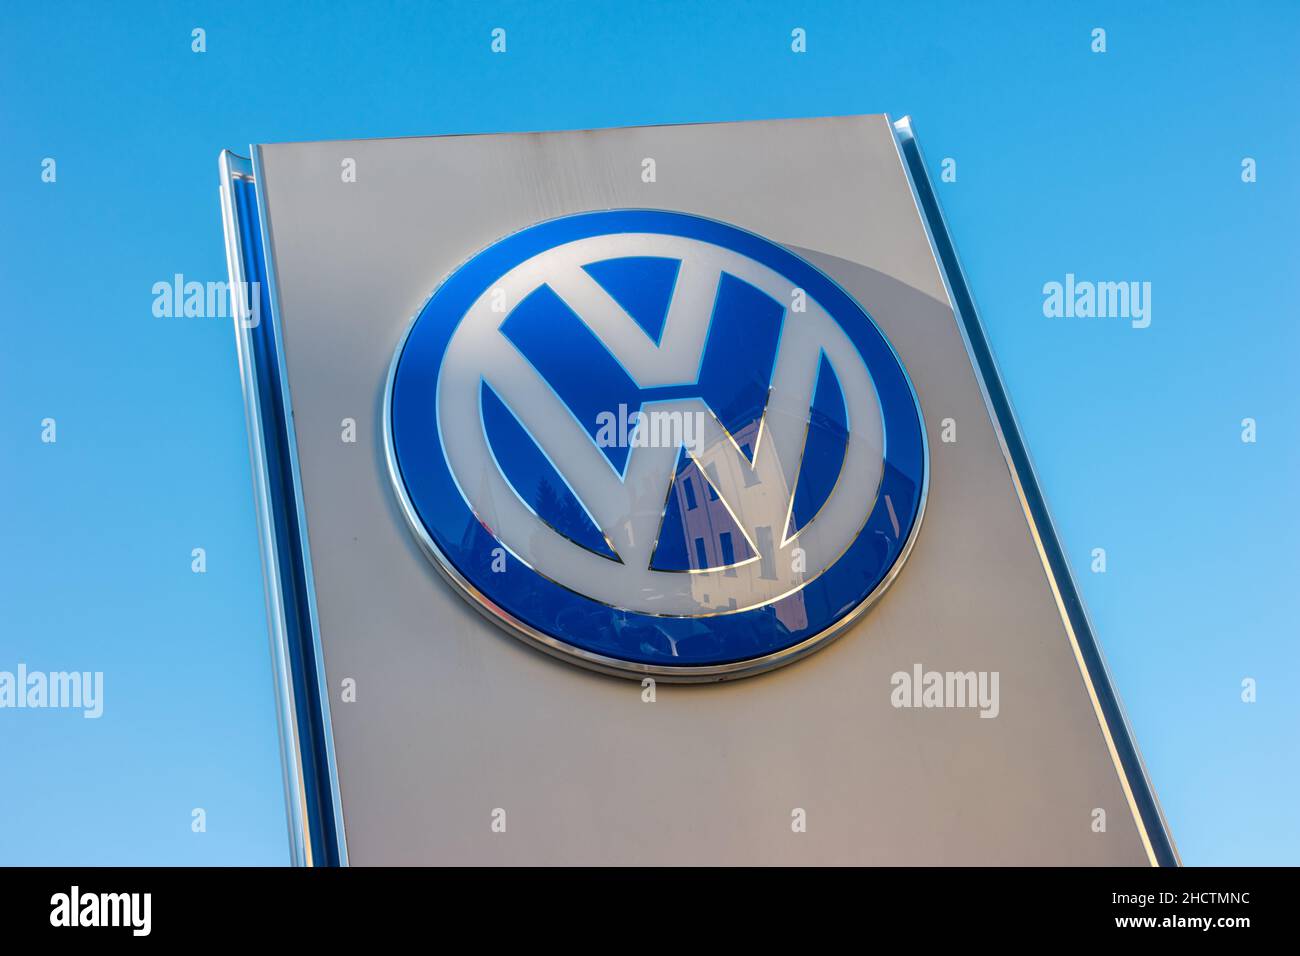 Volkswagen sign against blue sky. Volkswagen is the biggest German automaker and the third largest automaker in the world. Stock Photo